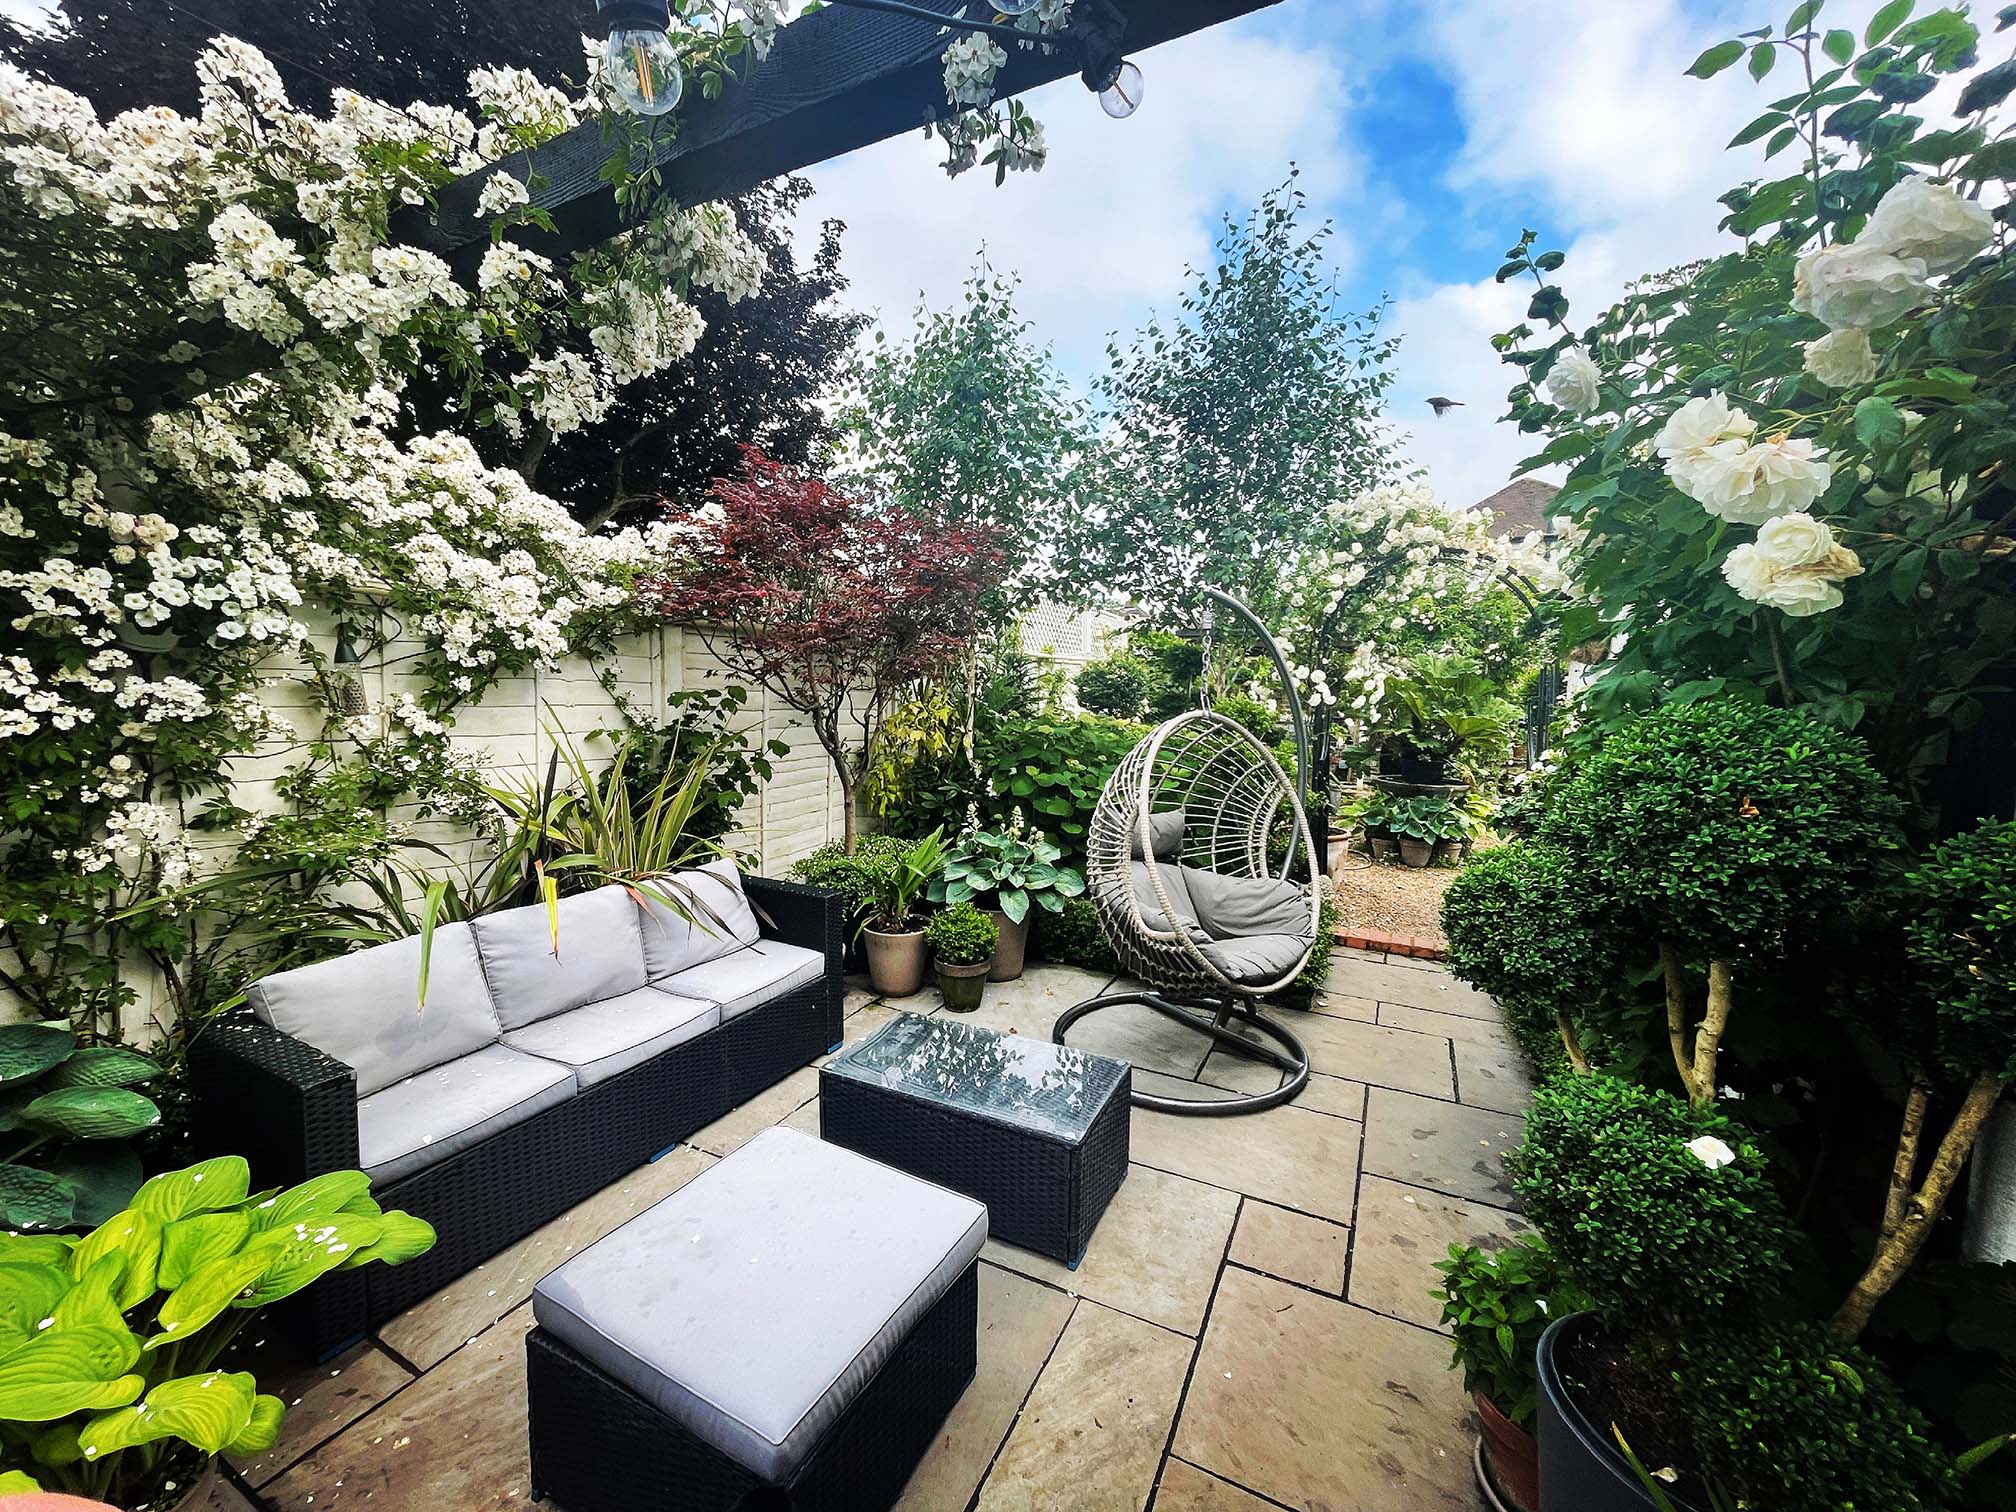 A designer patio surrounded by stunning plants and shrubbery